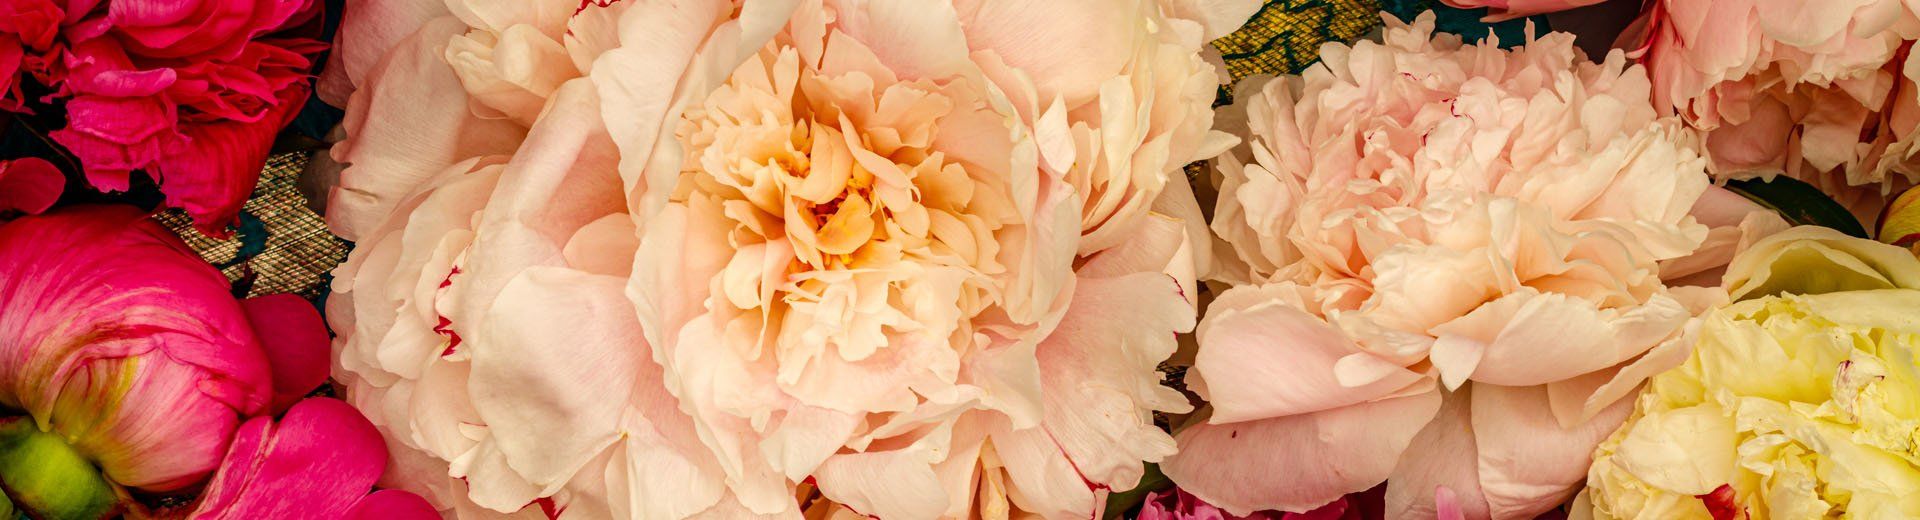 A banner image of pink and yellow peonies